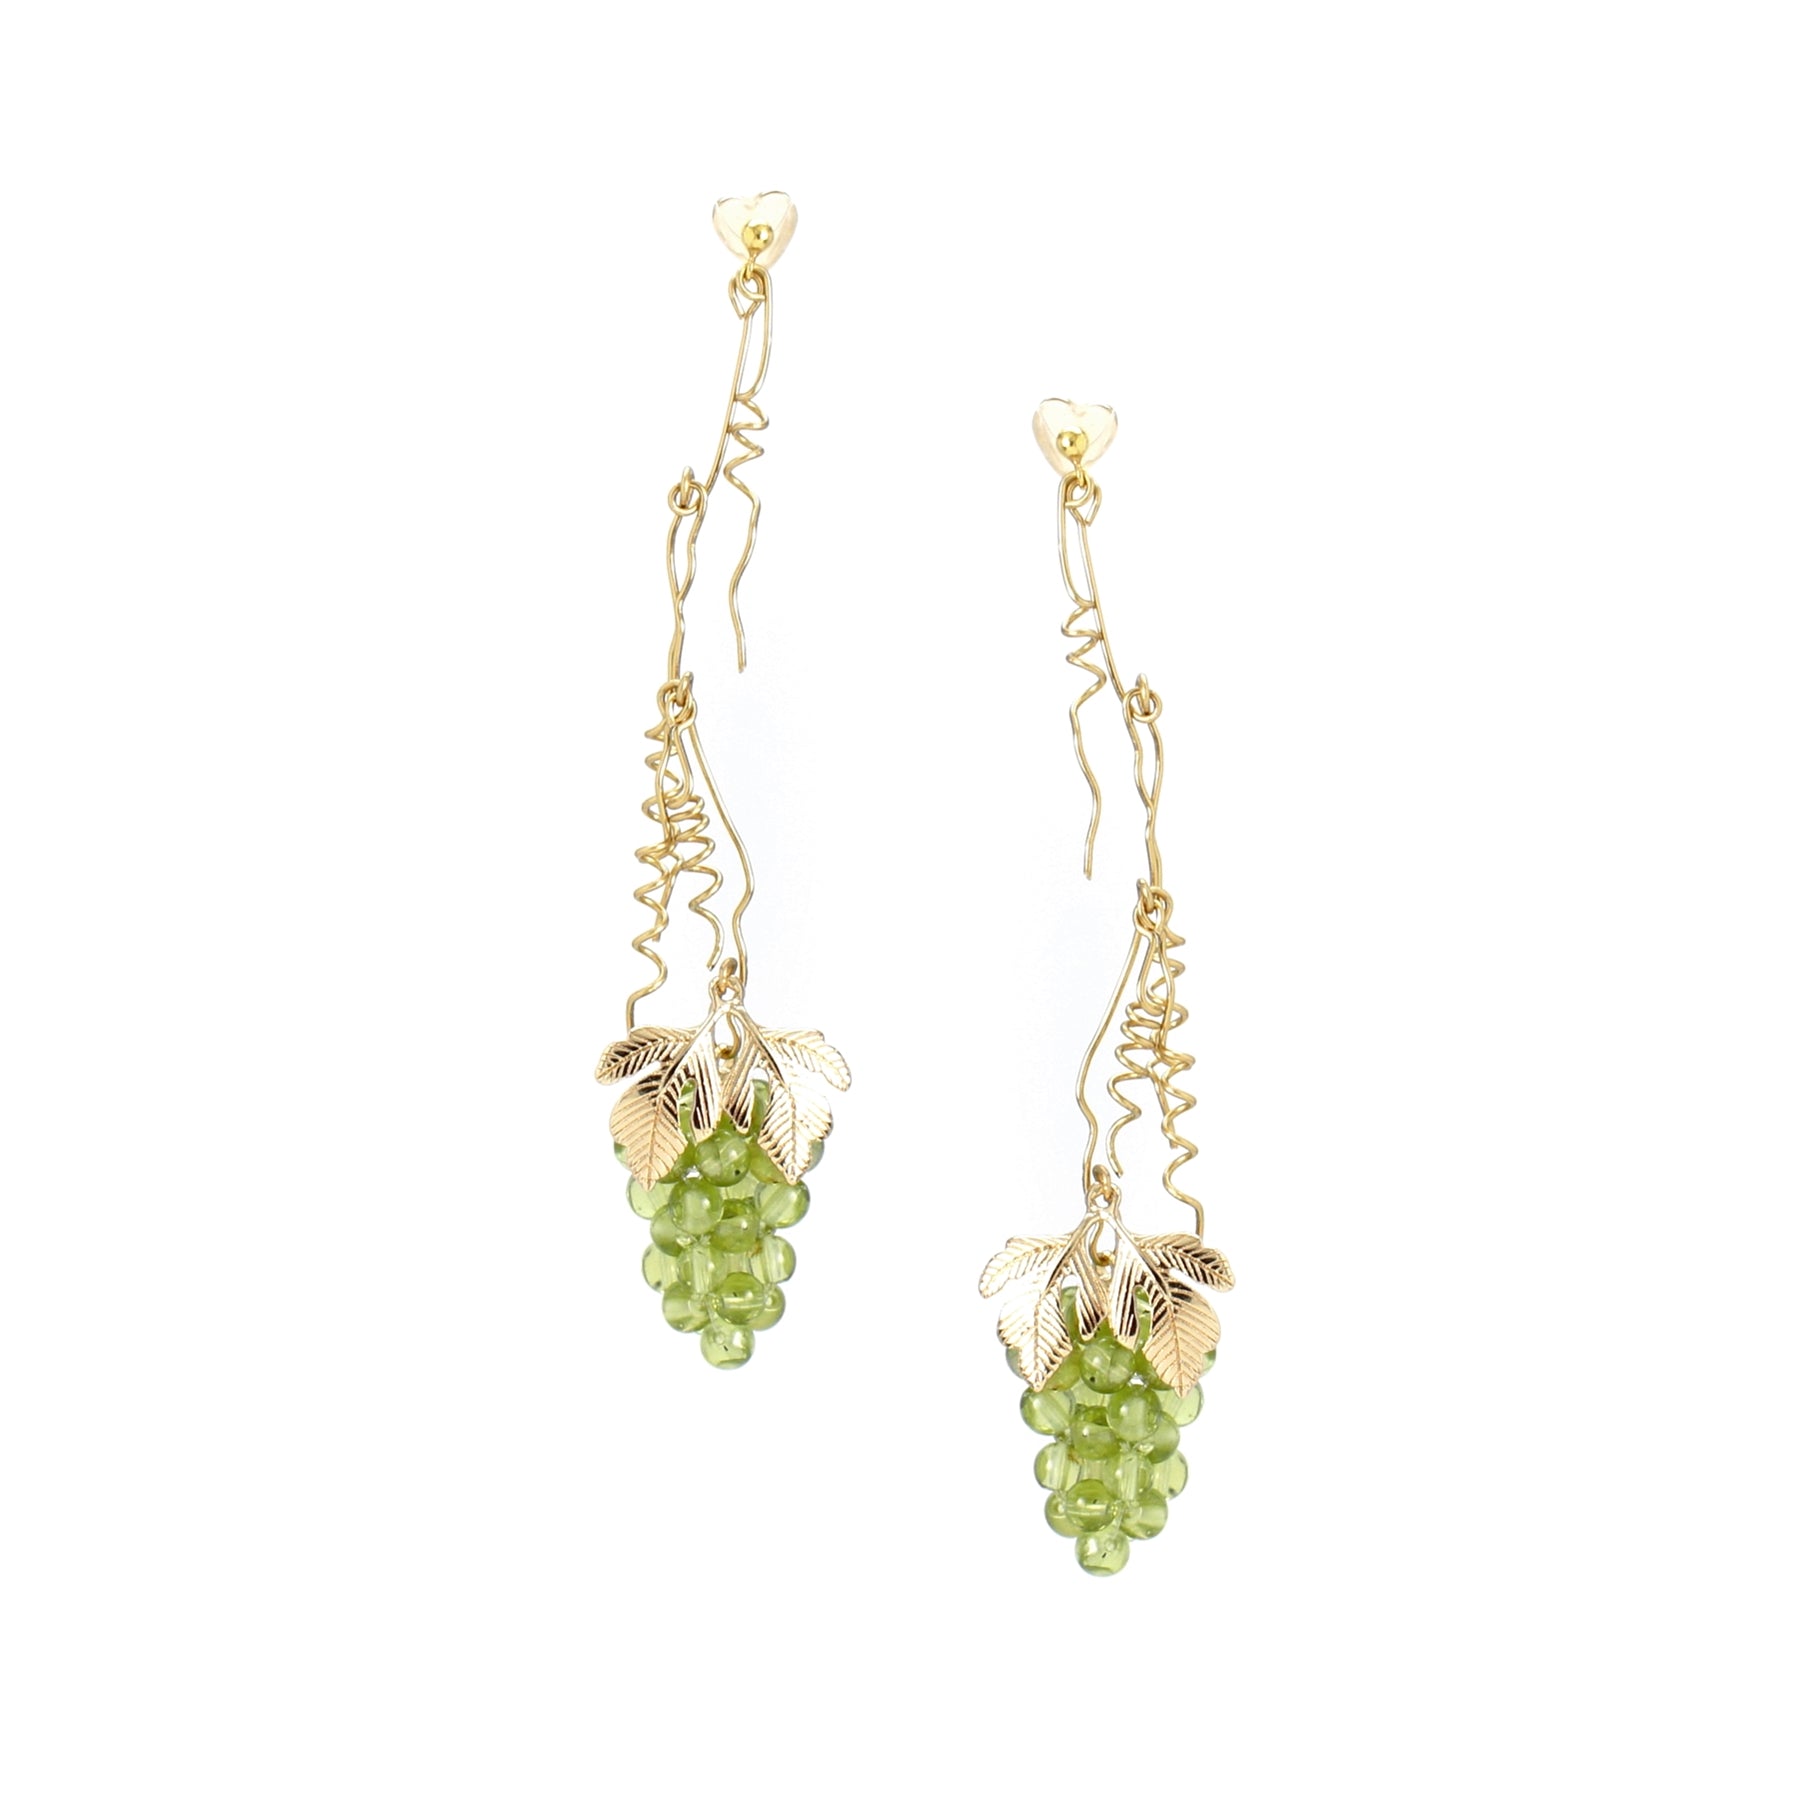 Very Grapeful Bunch of Grapes on Vines Drop Earring No.1